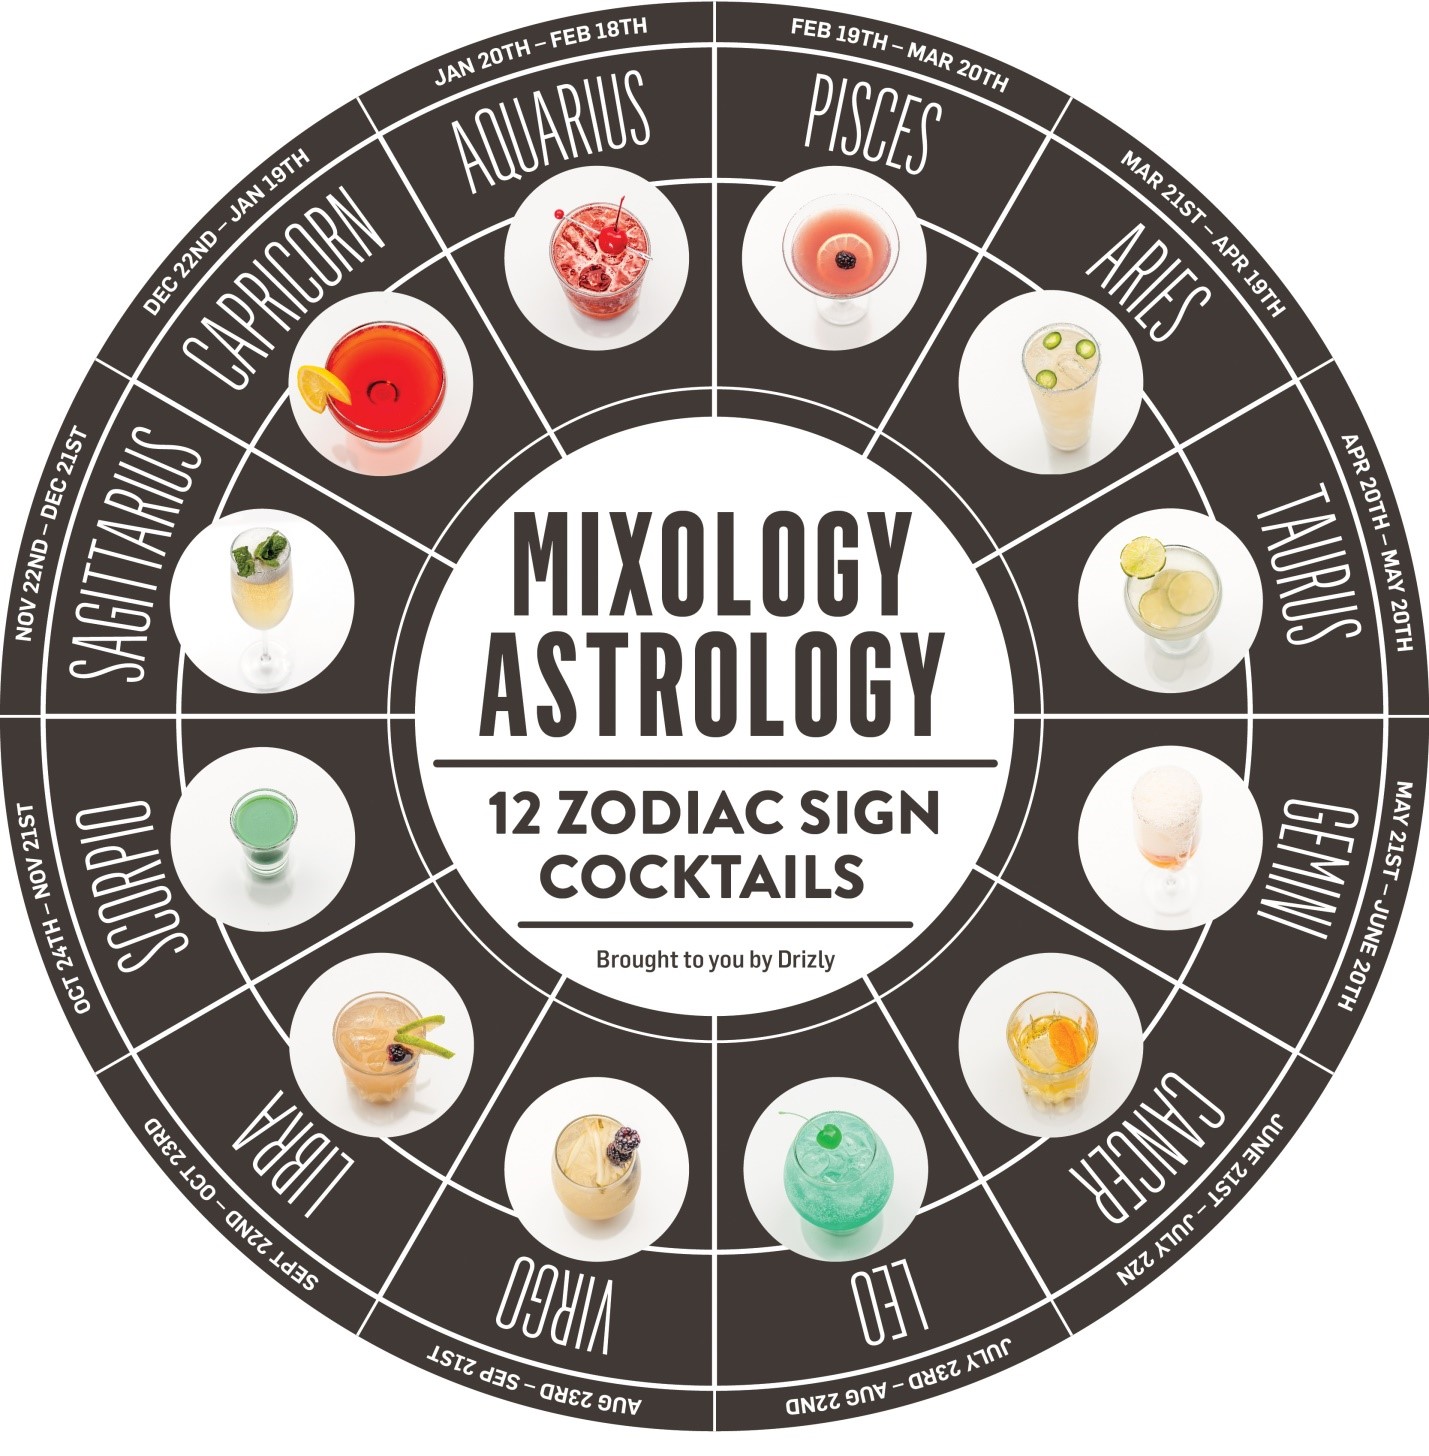 How to choose alcohol as per your zodiac